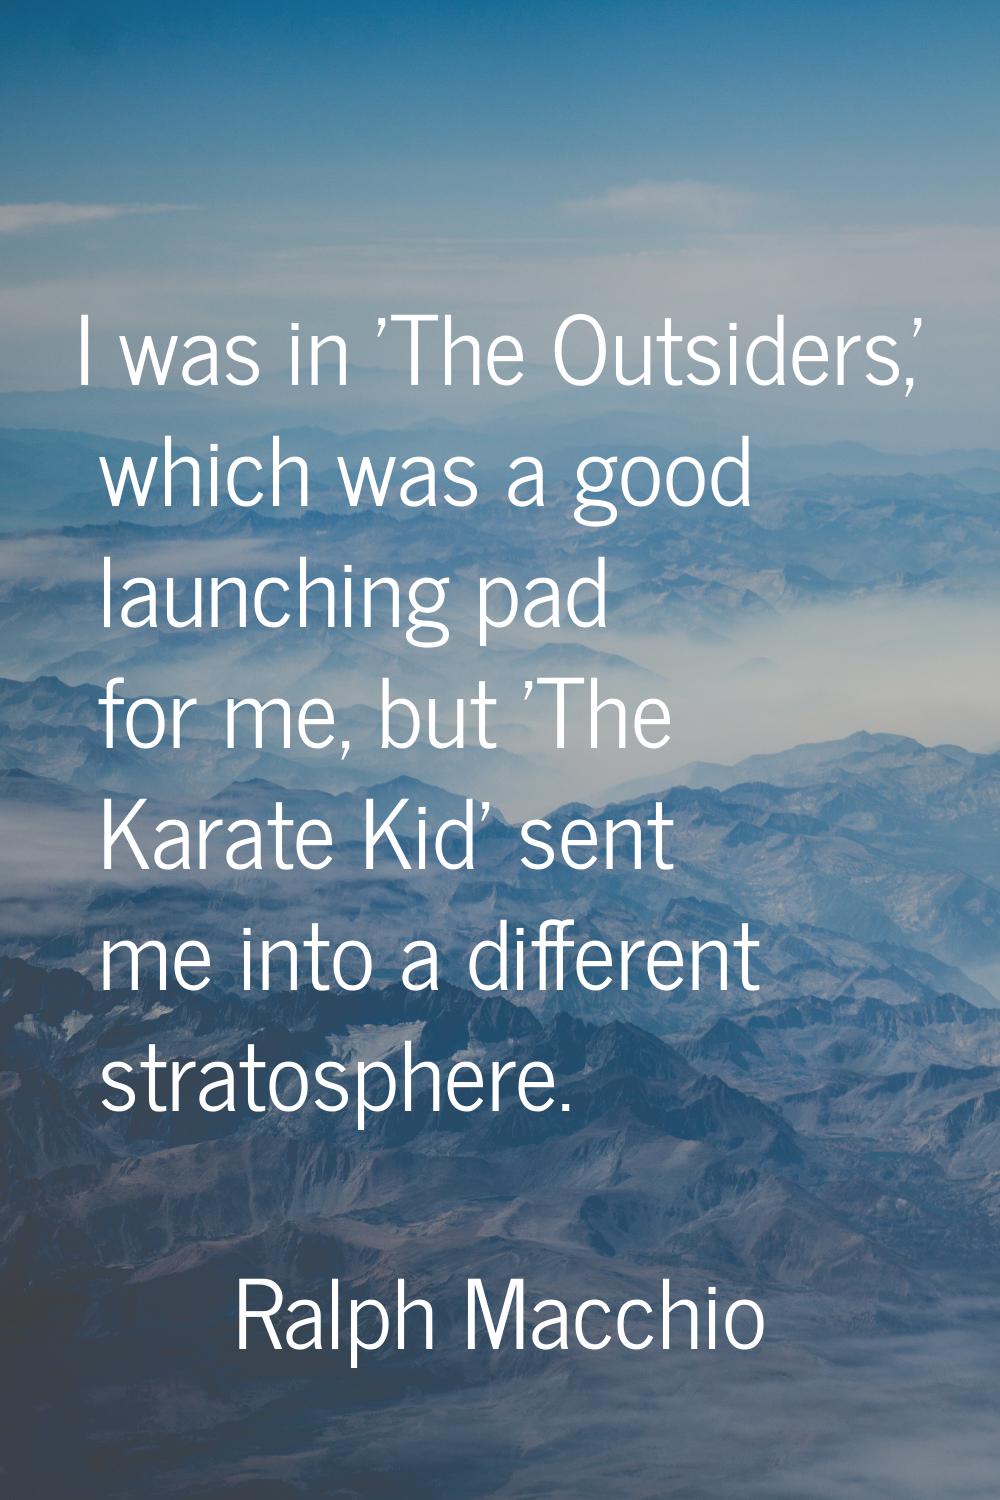 I was in 'The Outsiders,' which was a good launching pad for me, but 'The Karate Kid' sent me into 